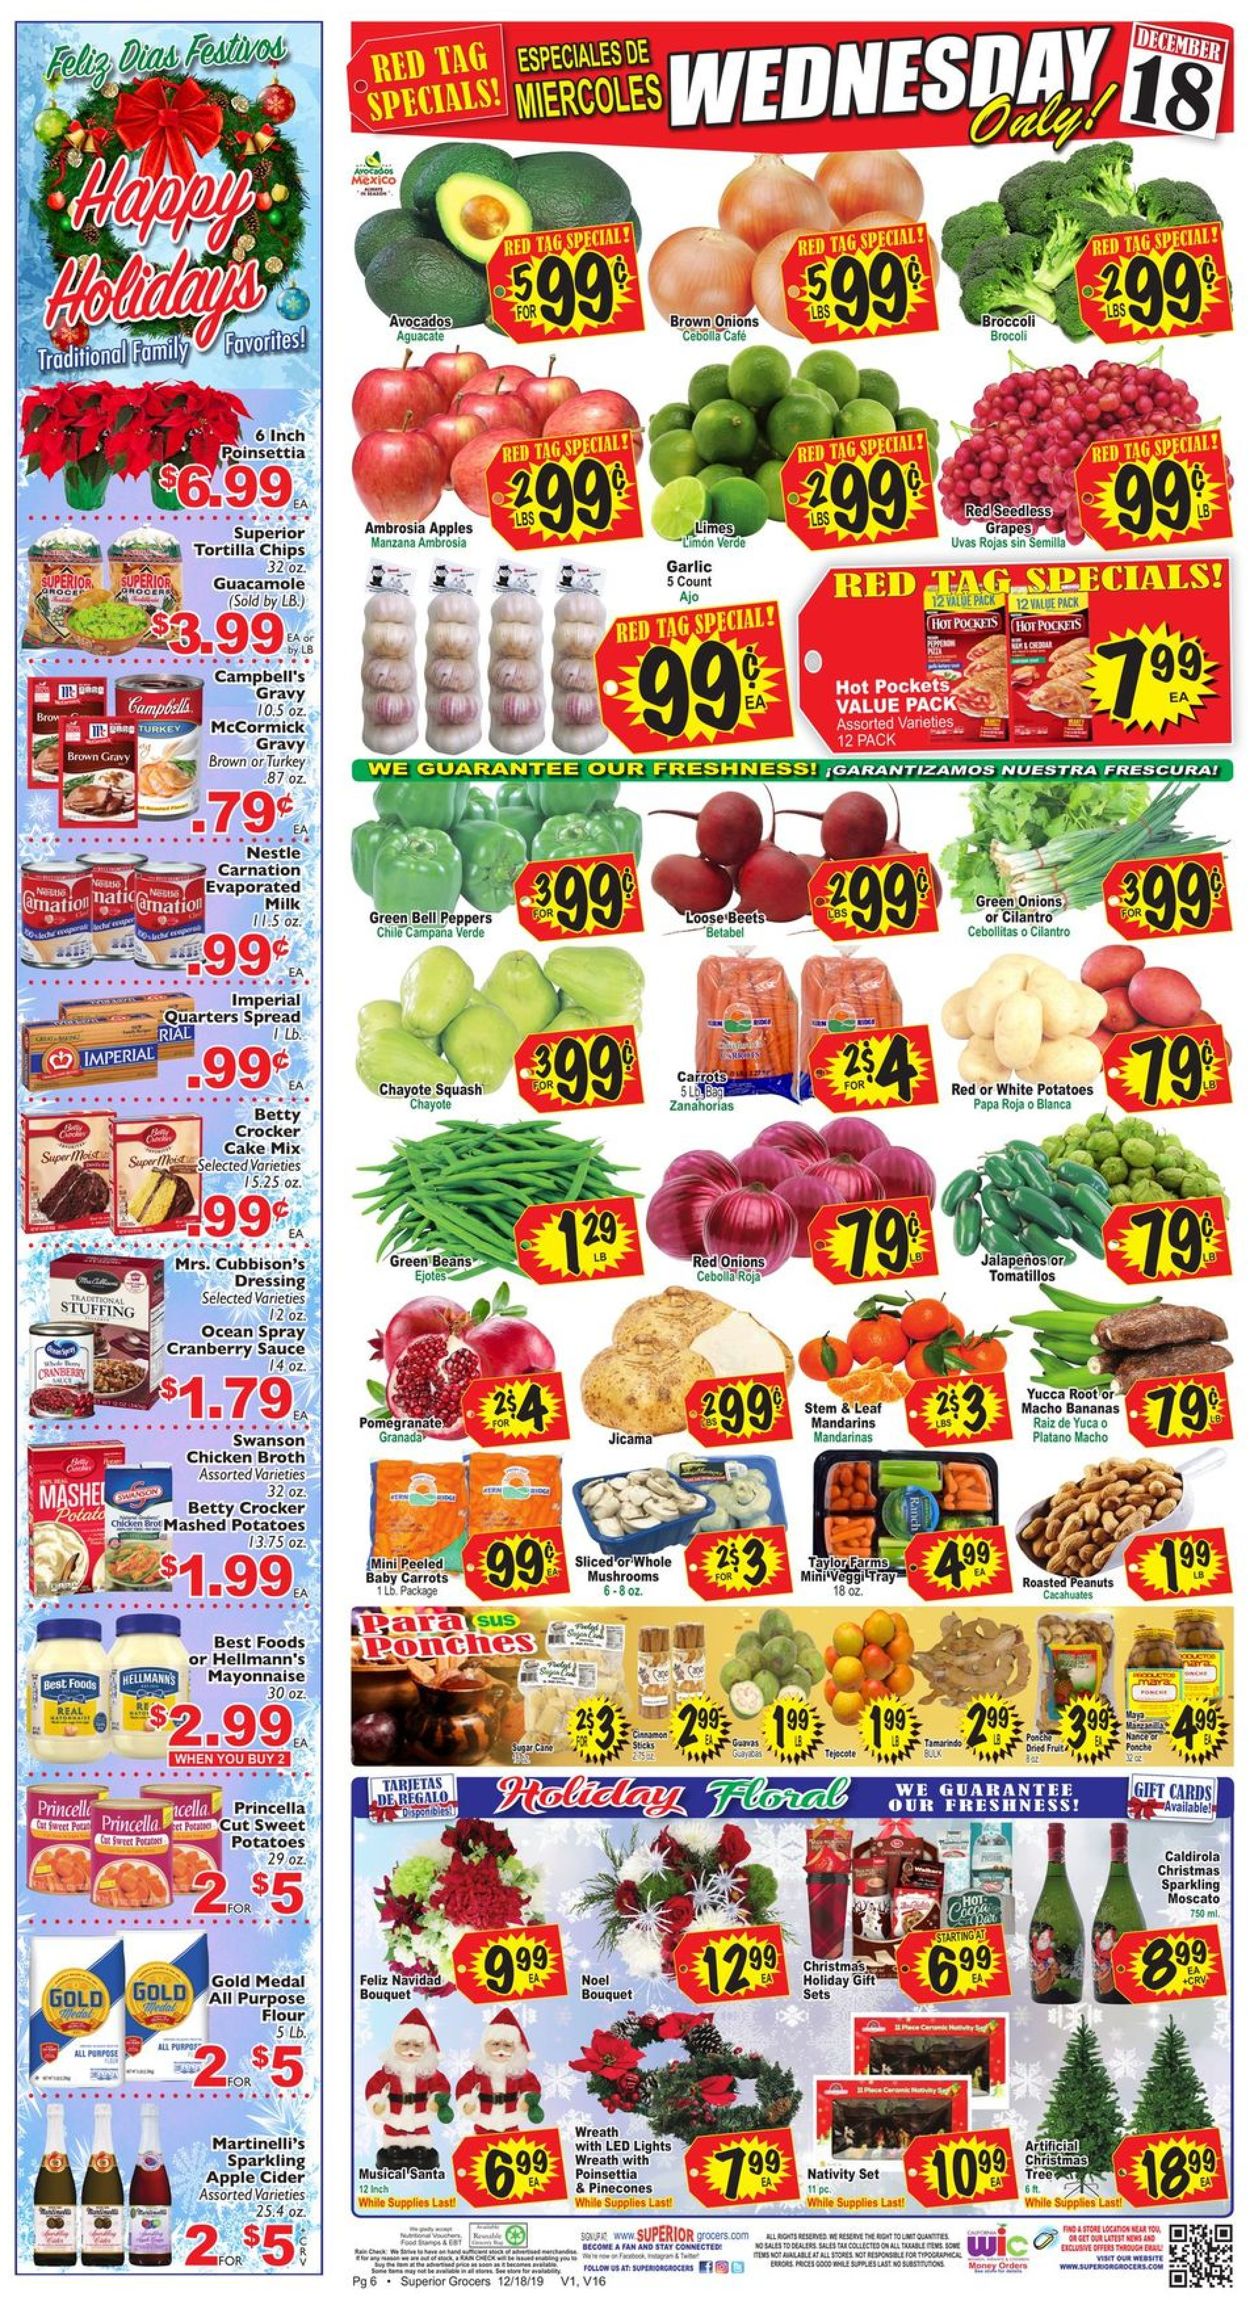 Catalogue Superior Grocers from 12/18/2019